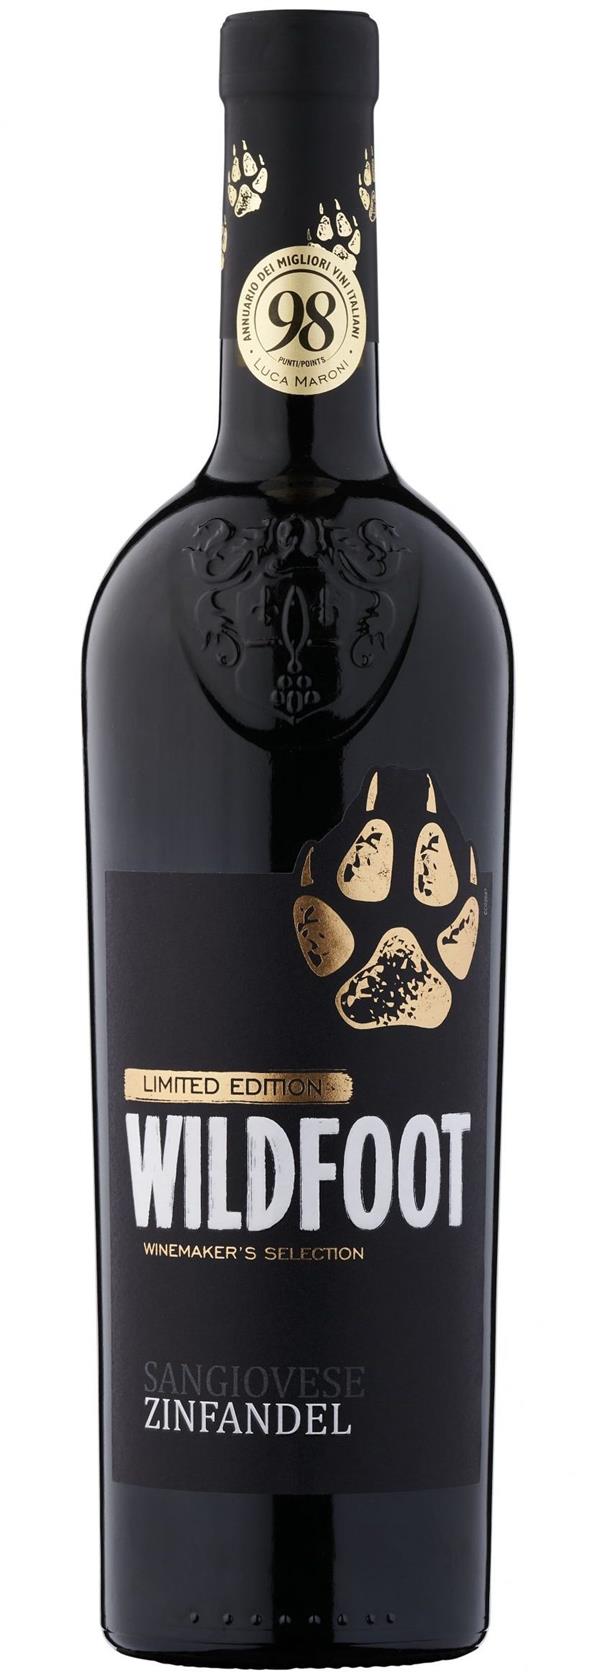 Wildfoot – Sangiovese Zinfandel Winemaker’s Selection Limited Edition 2021